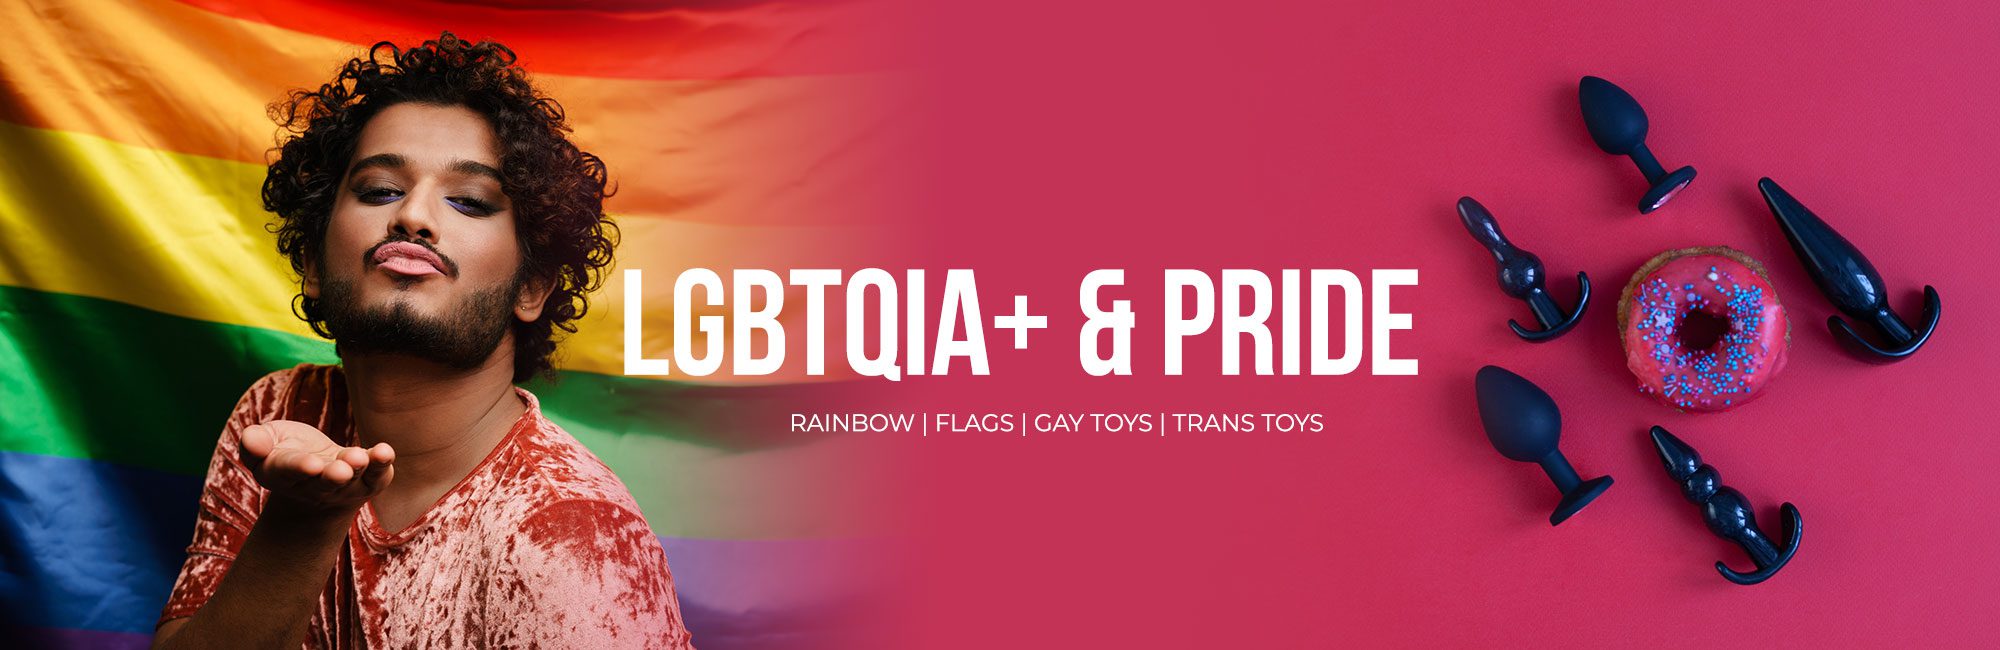 A banner featuring a person blowing a kiss in front of a rainbow flag on the left side, with the words "LGBTQIA+ & PRIDE" in large white font on a red background on the right side. Below the text, various black-shaped silicone items and a sprinkled pink donut are arranged on the red surface.